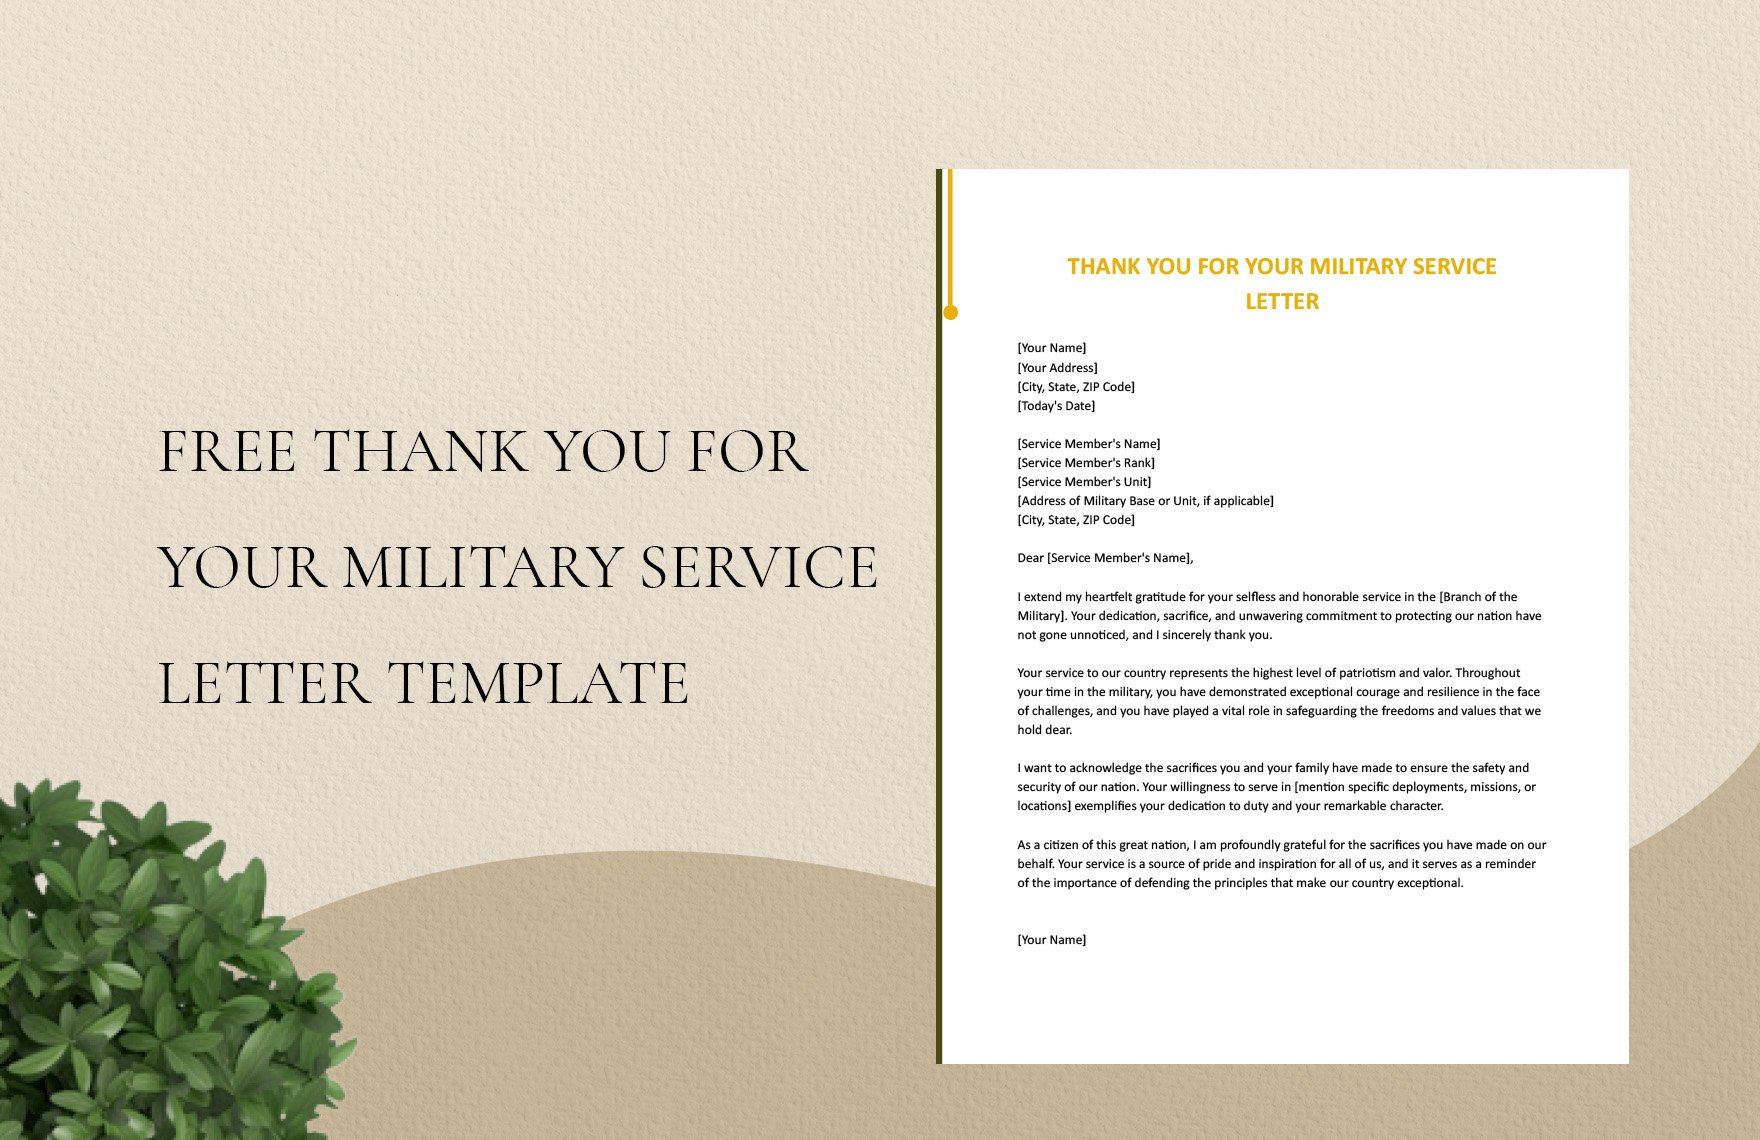 thank-you-for-your-military-service-letter-template